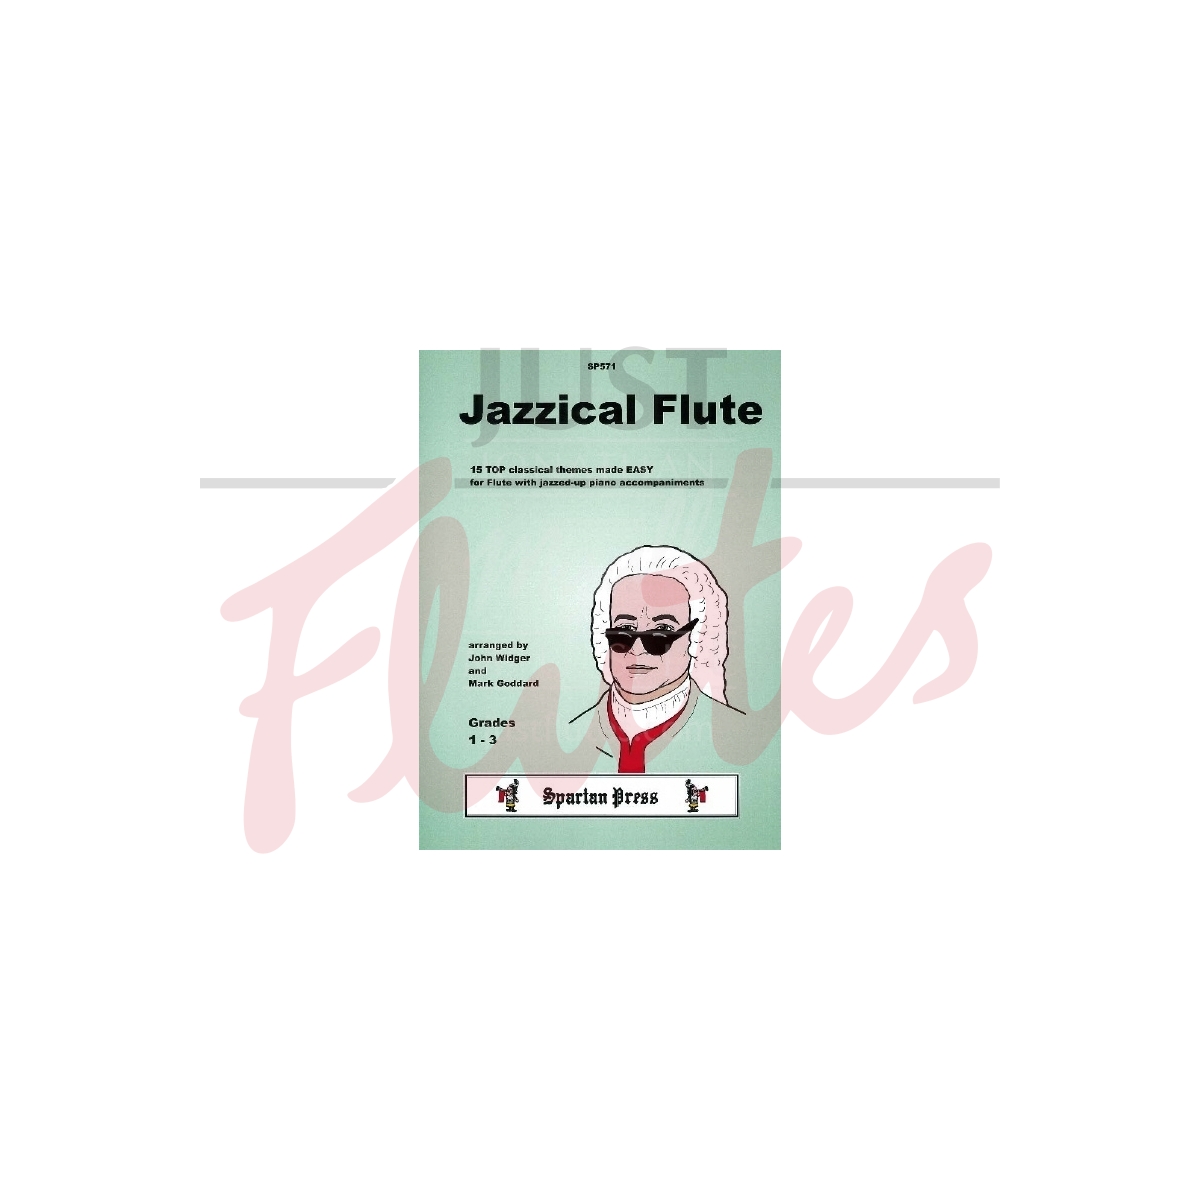 Jazzical Flute: 15 Top Classical Themes with Jazzed-Up Piano Acc